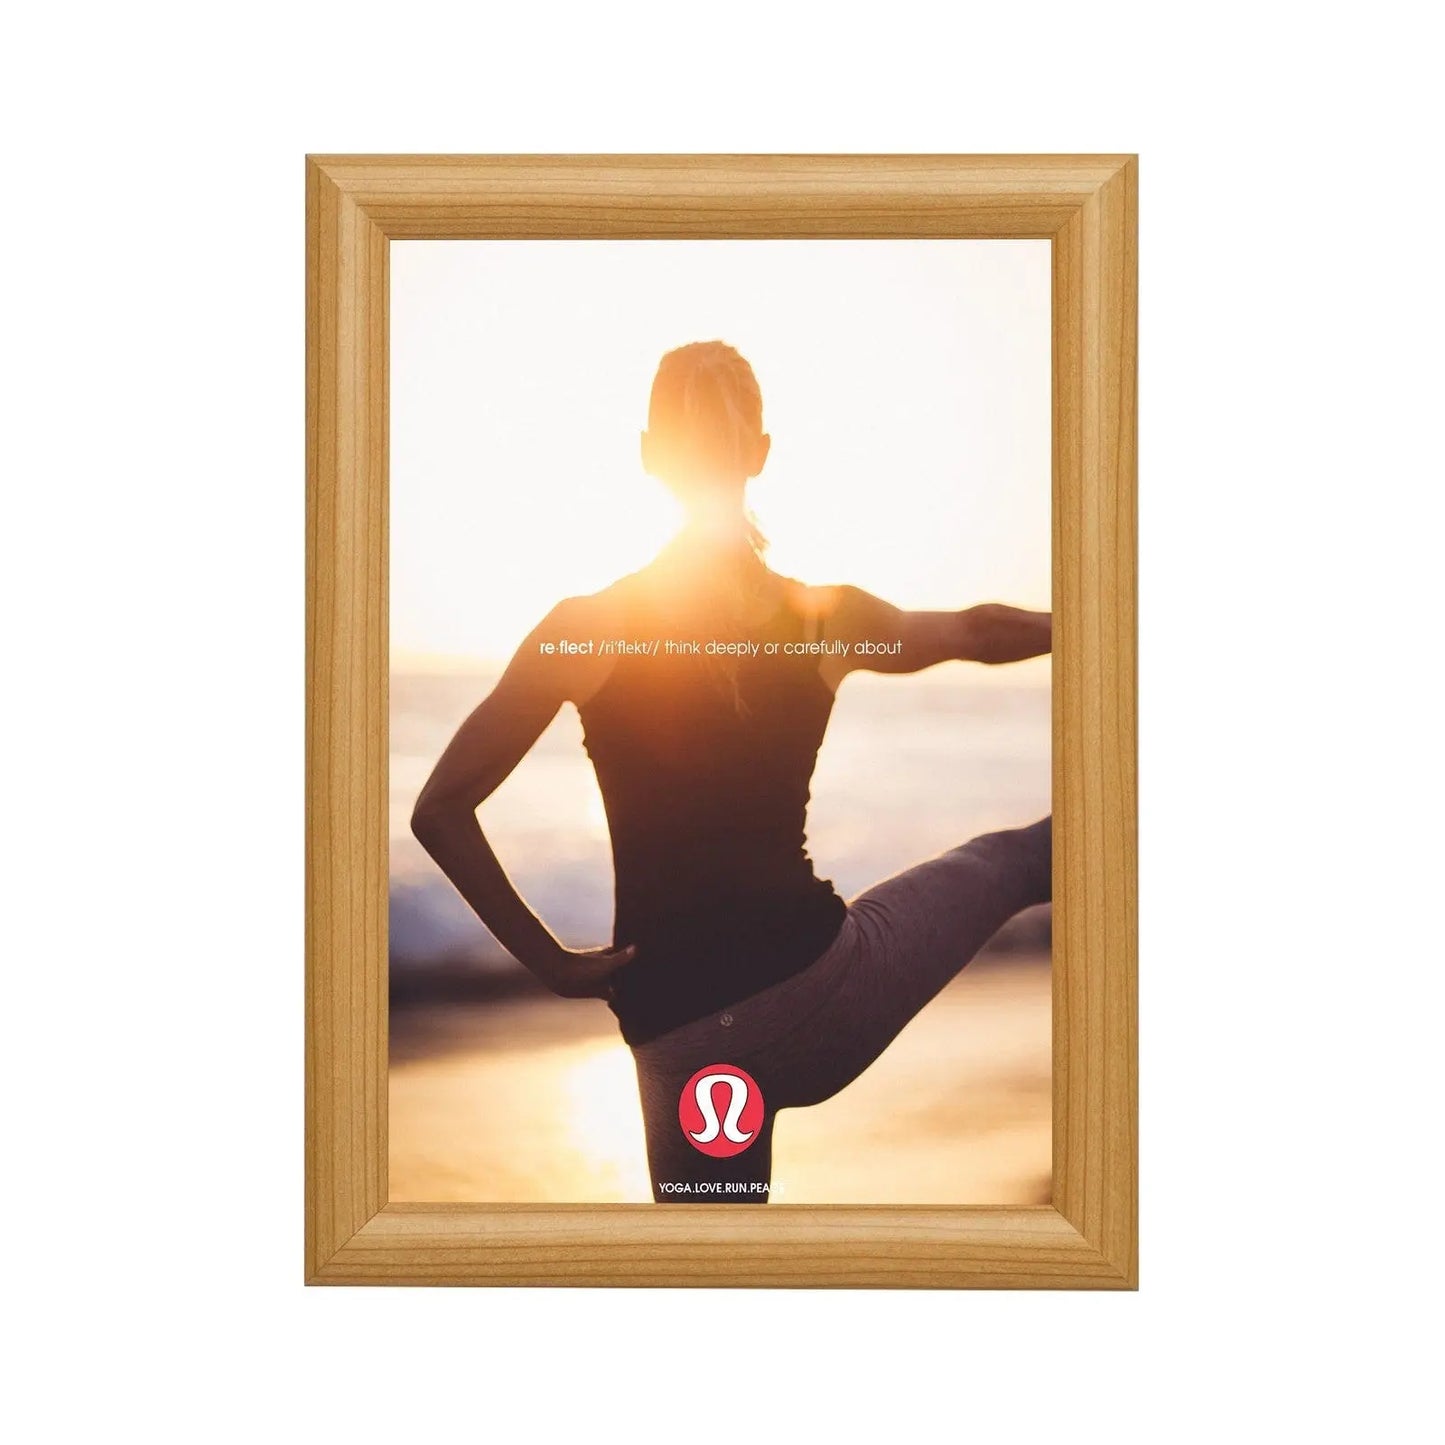 Light Wood snap frame poster size 24X30 - 1 inch profile - Snap Frames Direct